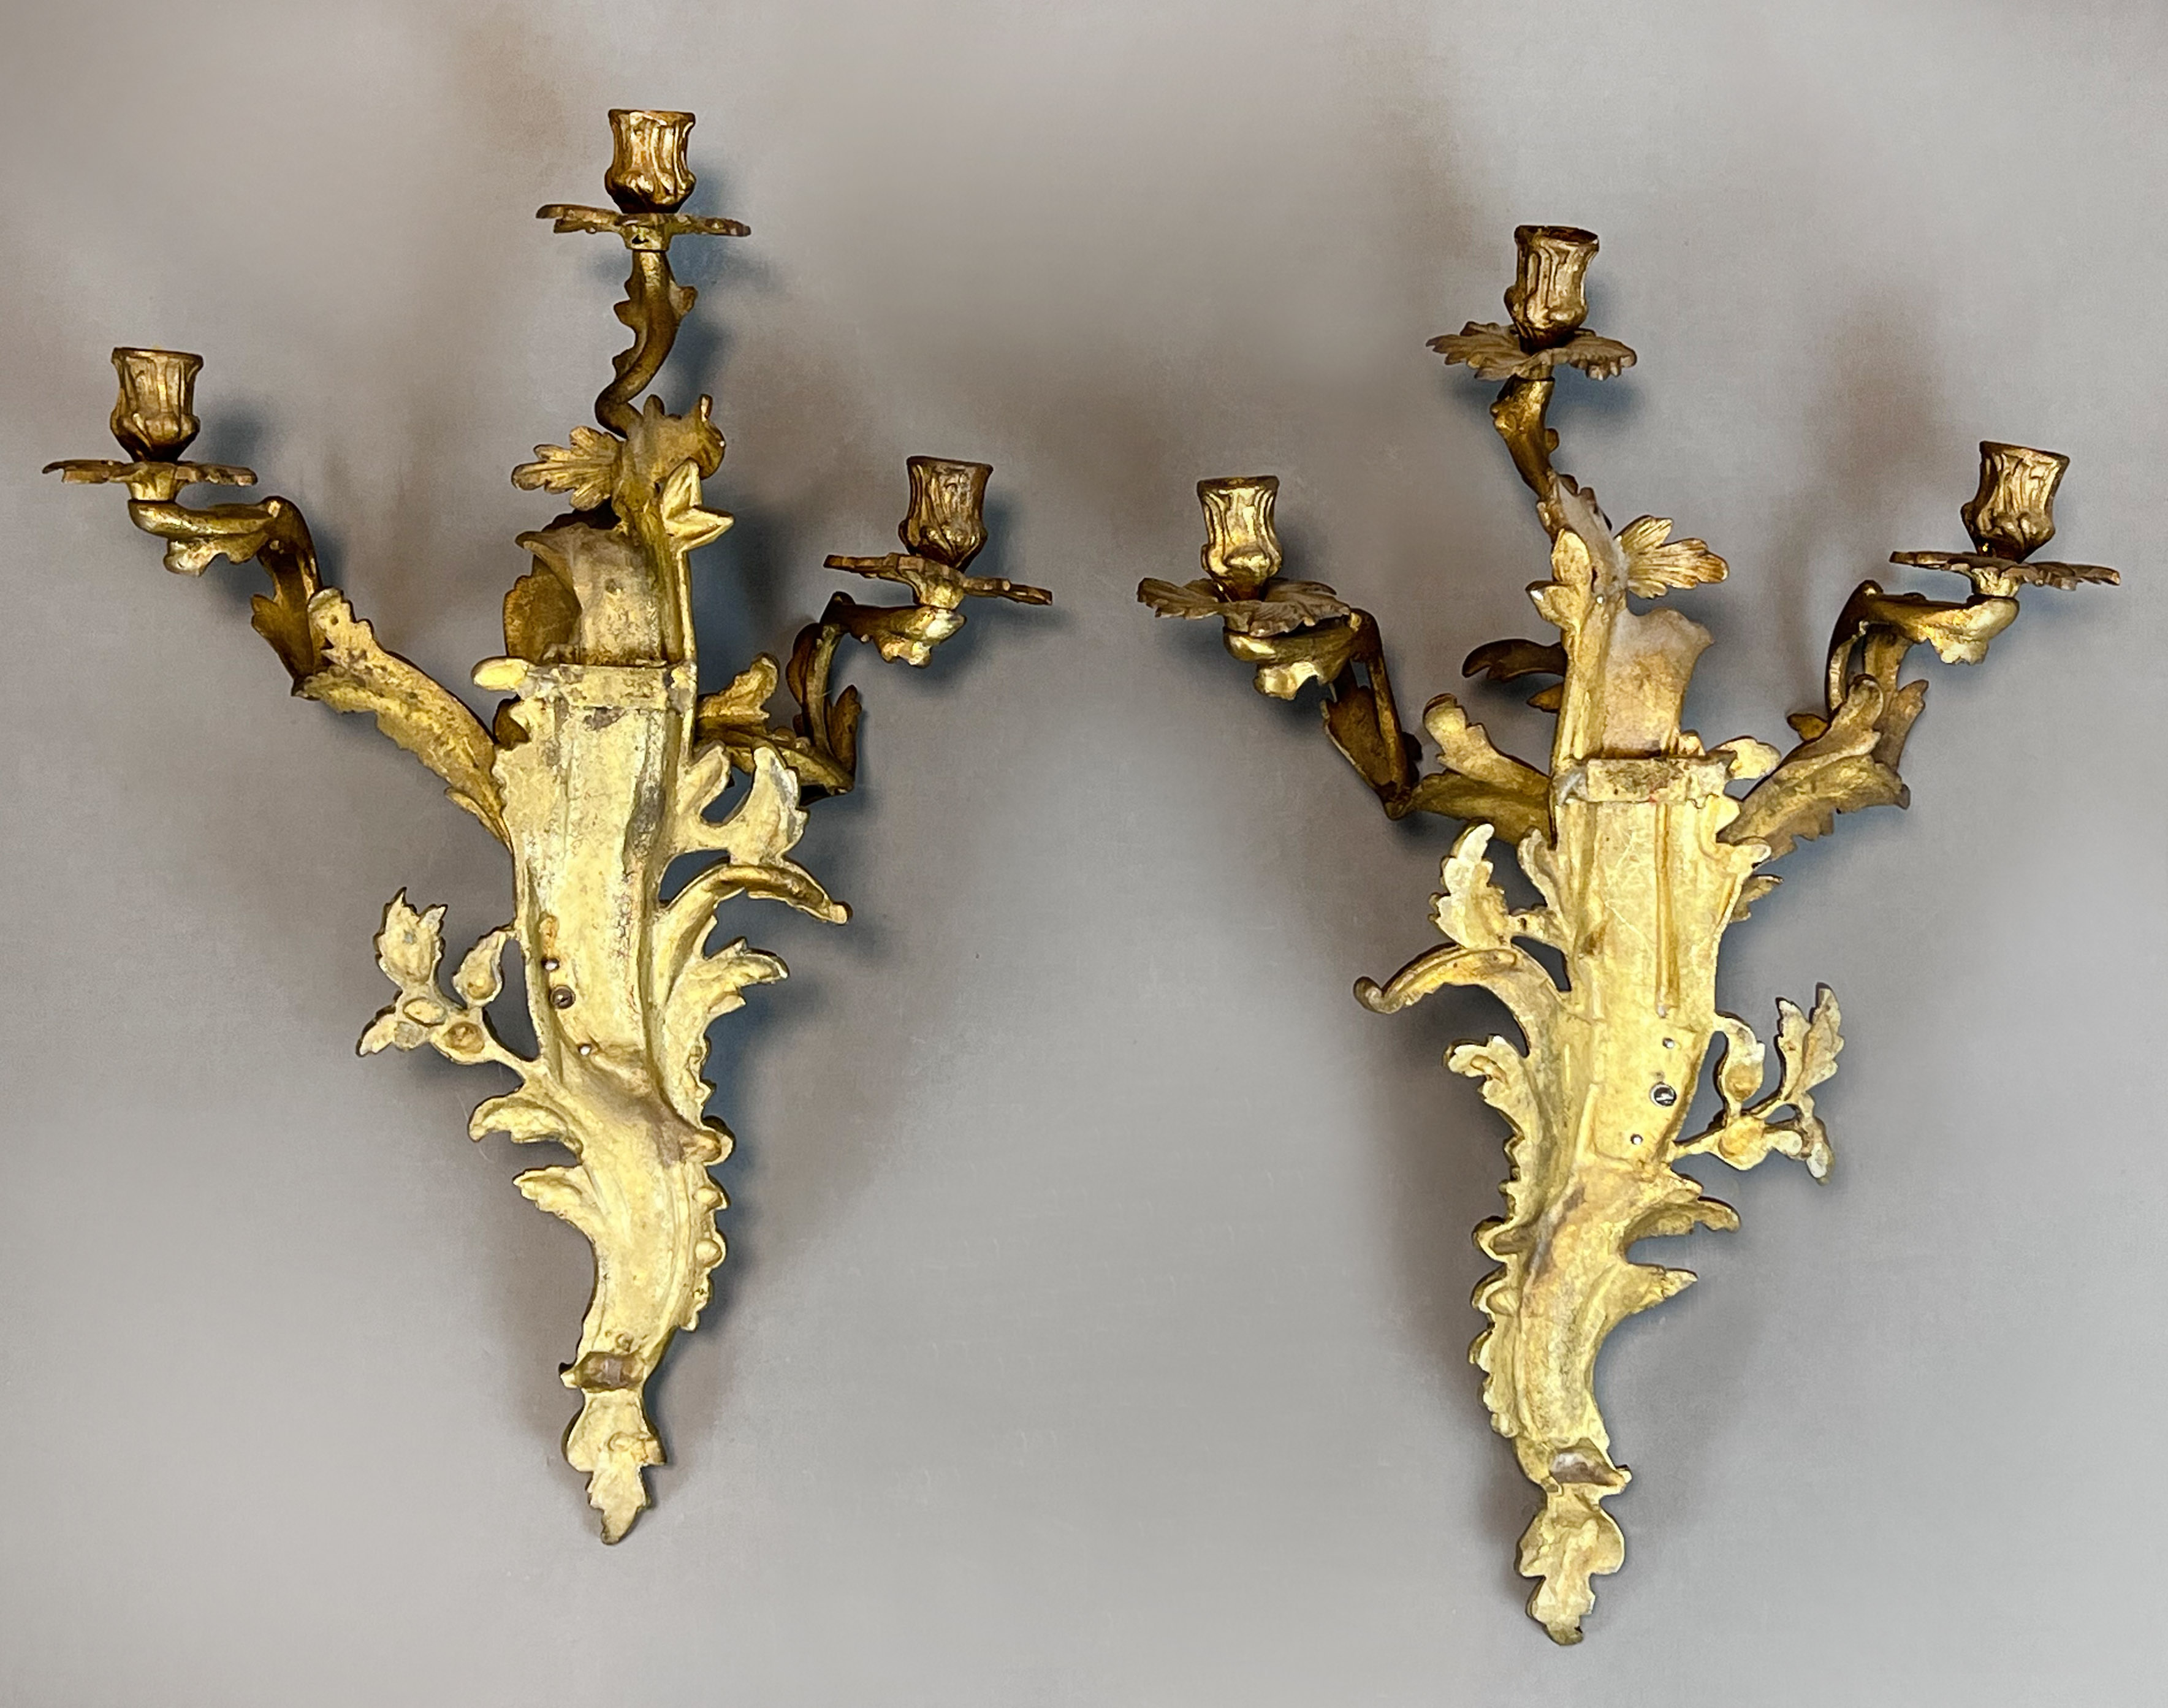 Pair of antique wall candlesticks. Gilt bronze. 19th century. - Image 8 of 11